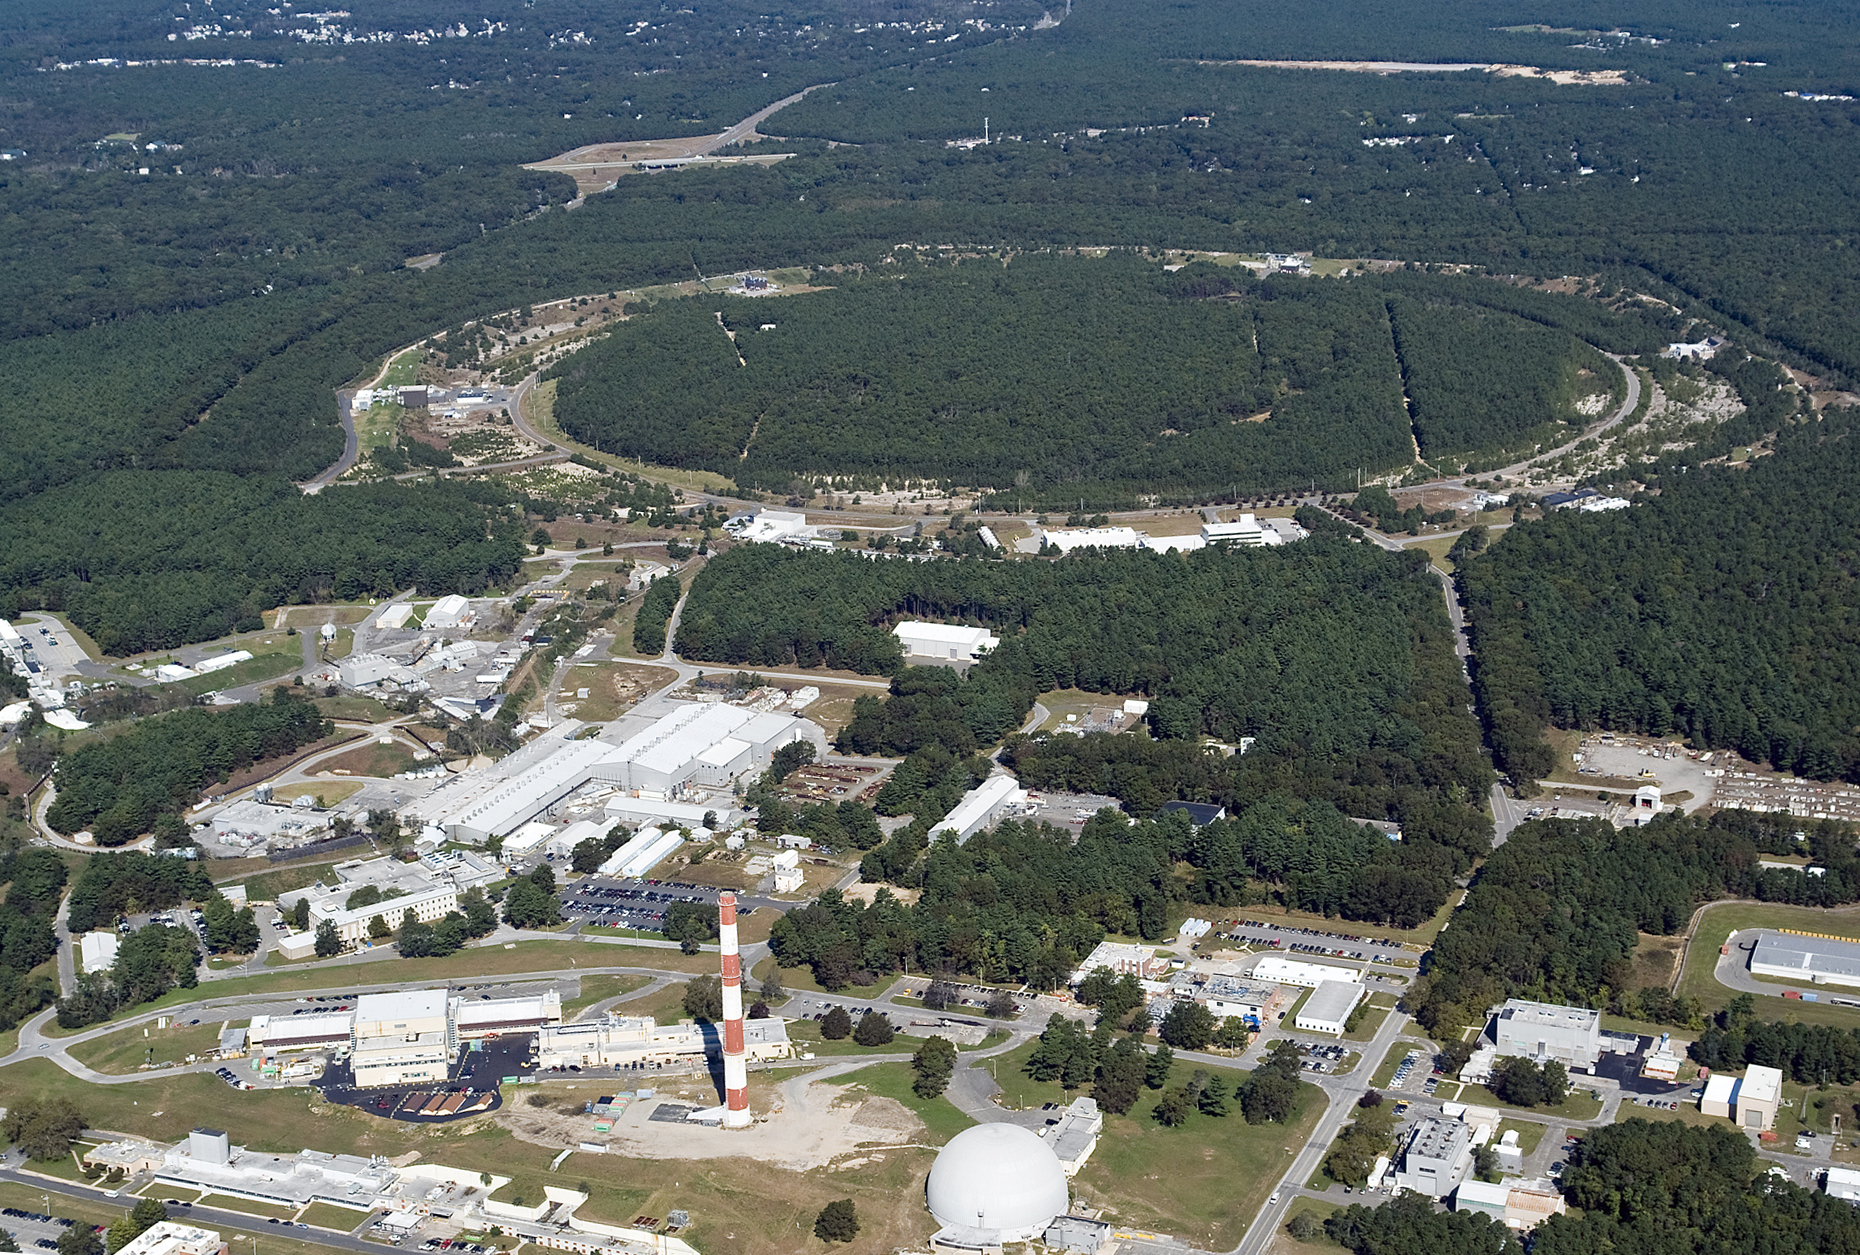 Brookhaven Lab anticipates new facility for Electron-Ion Collider.